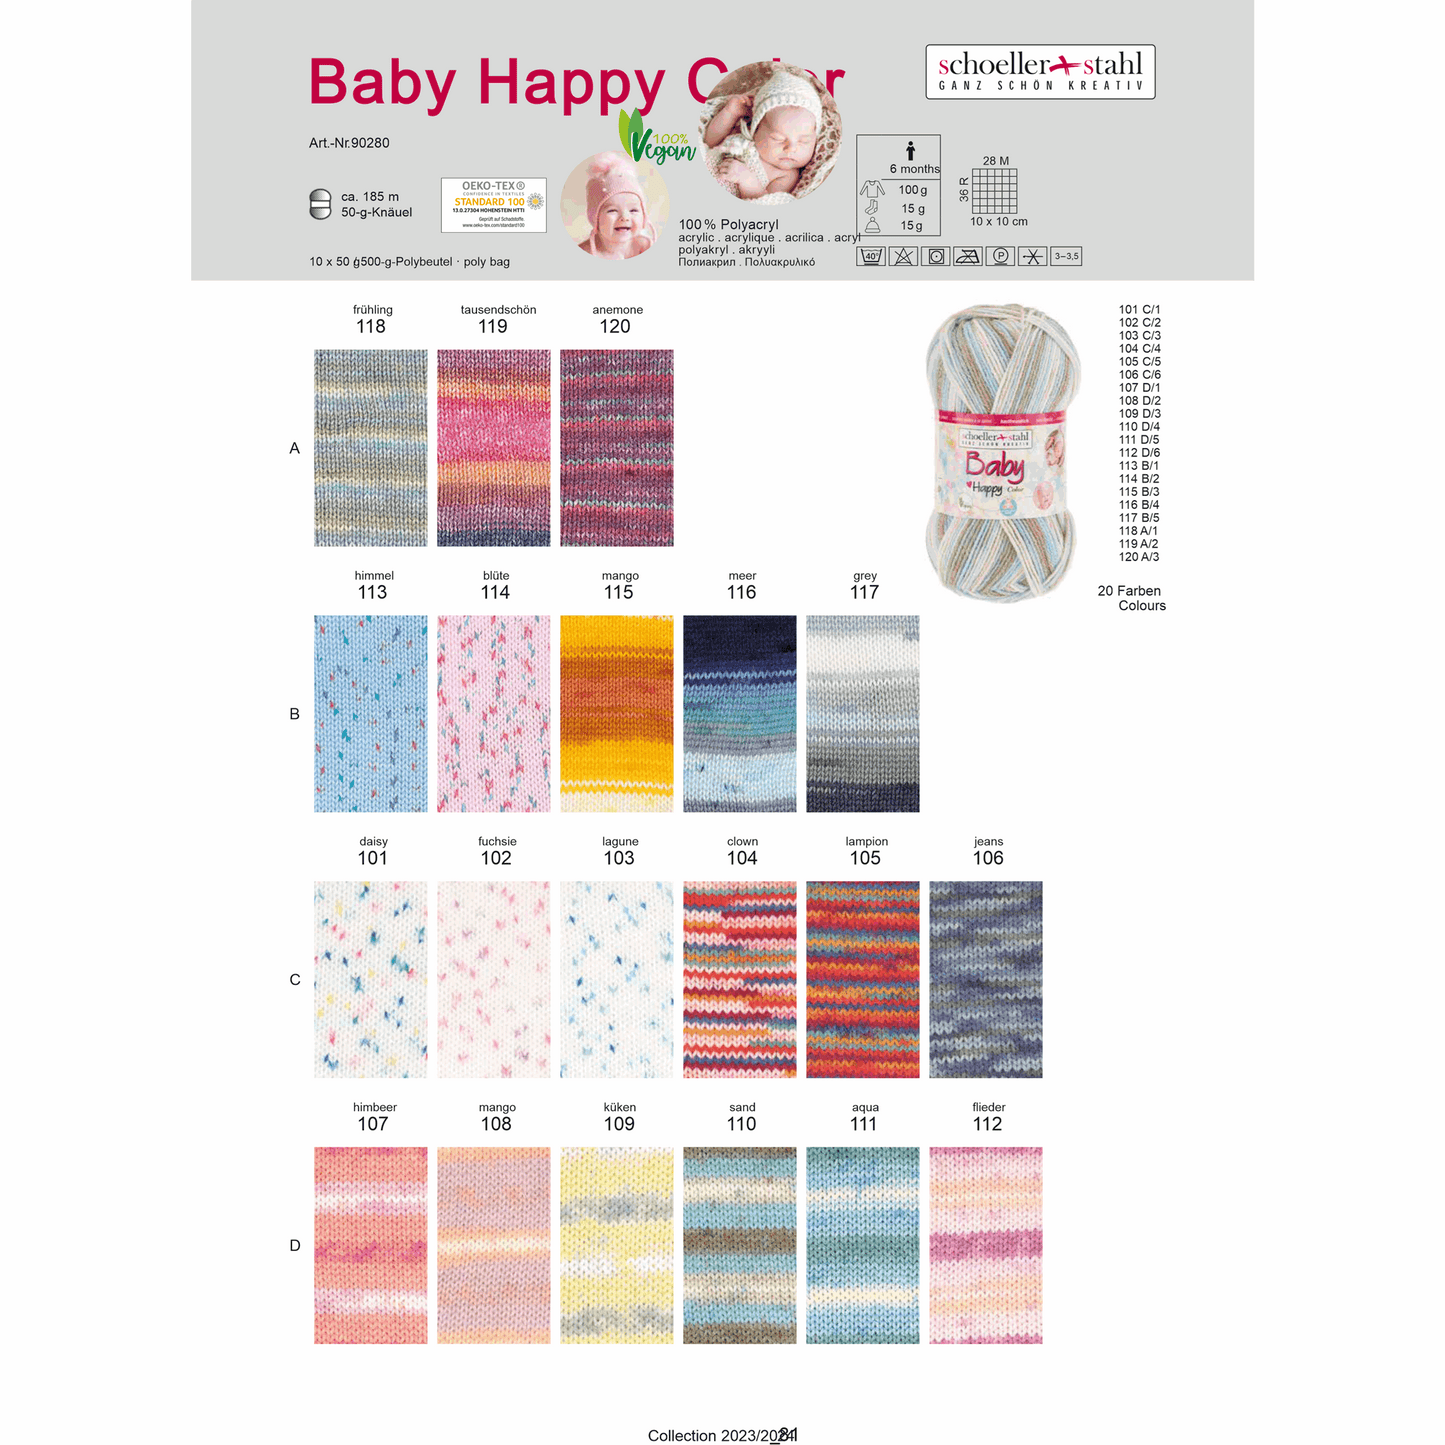 Baby happy color 50g, 90280, color 110, sand